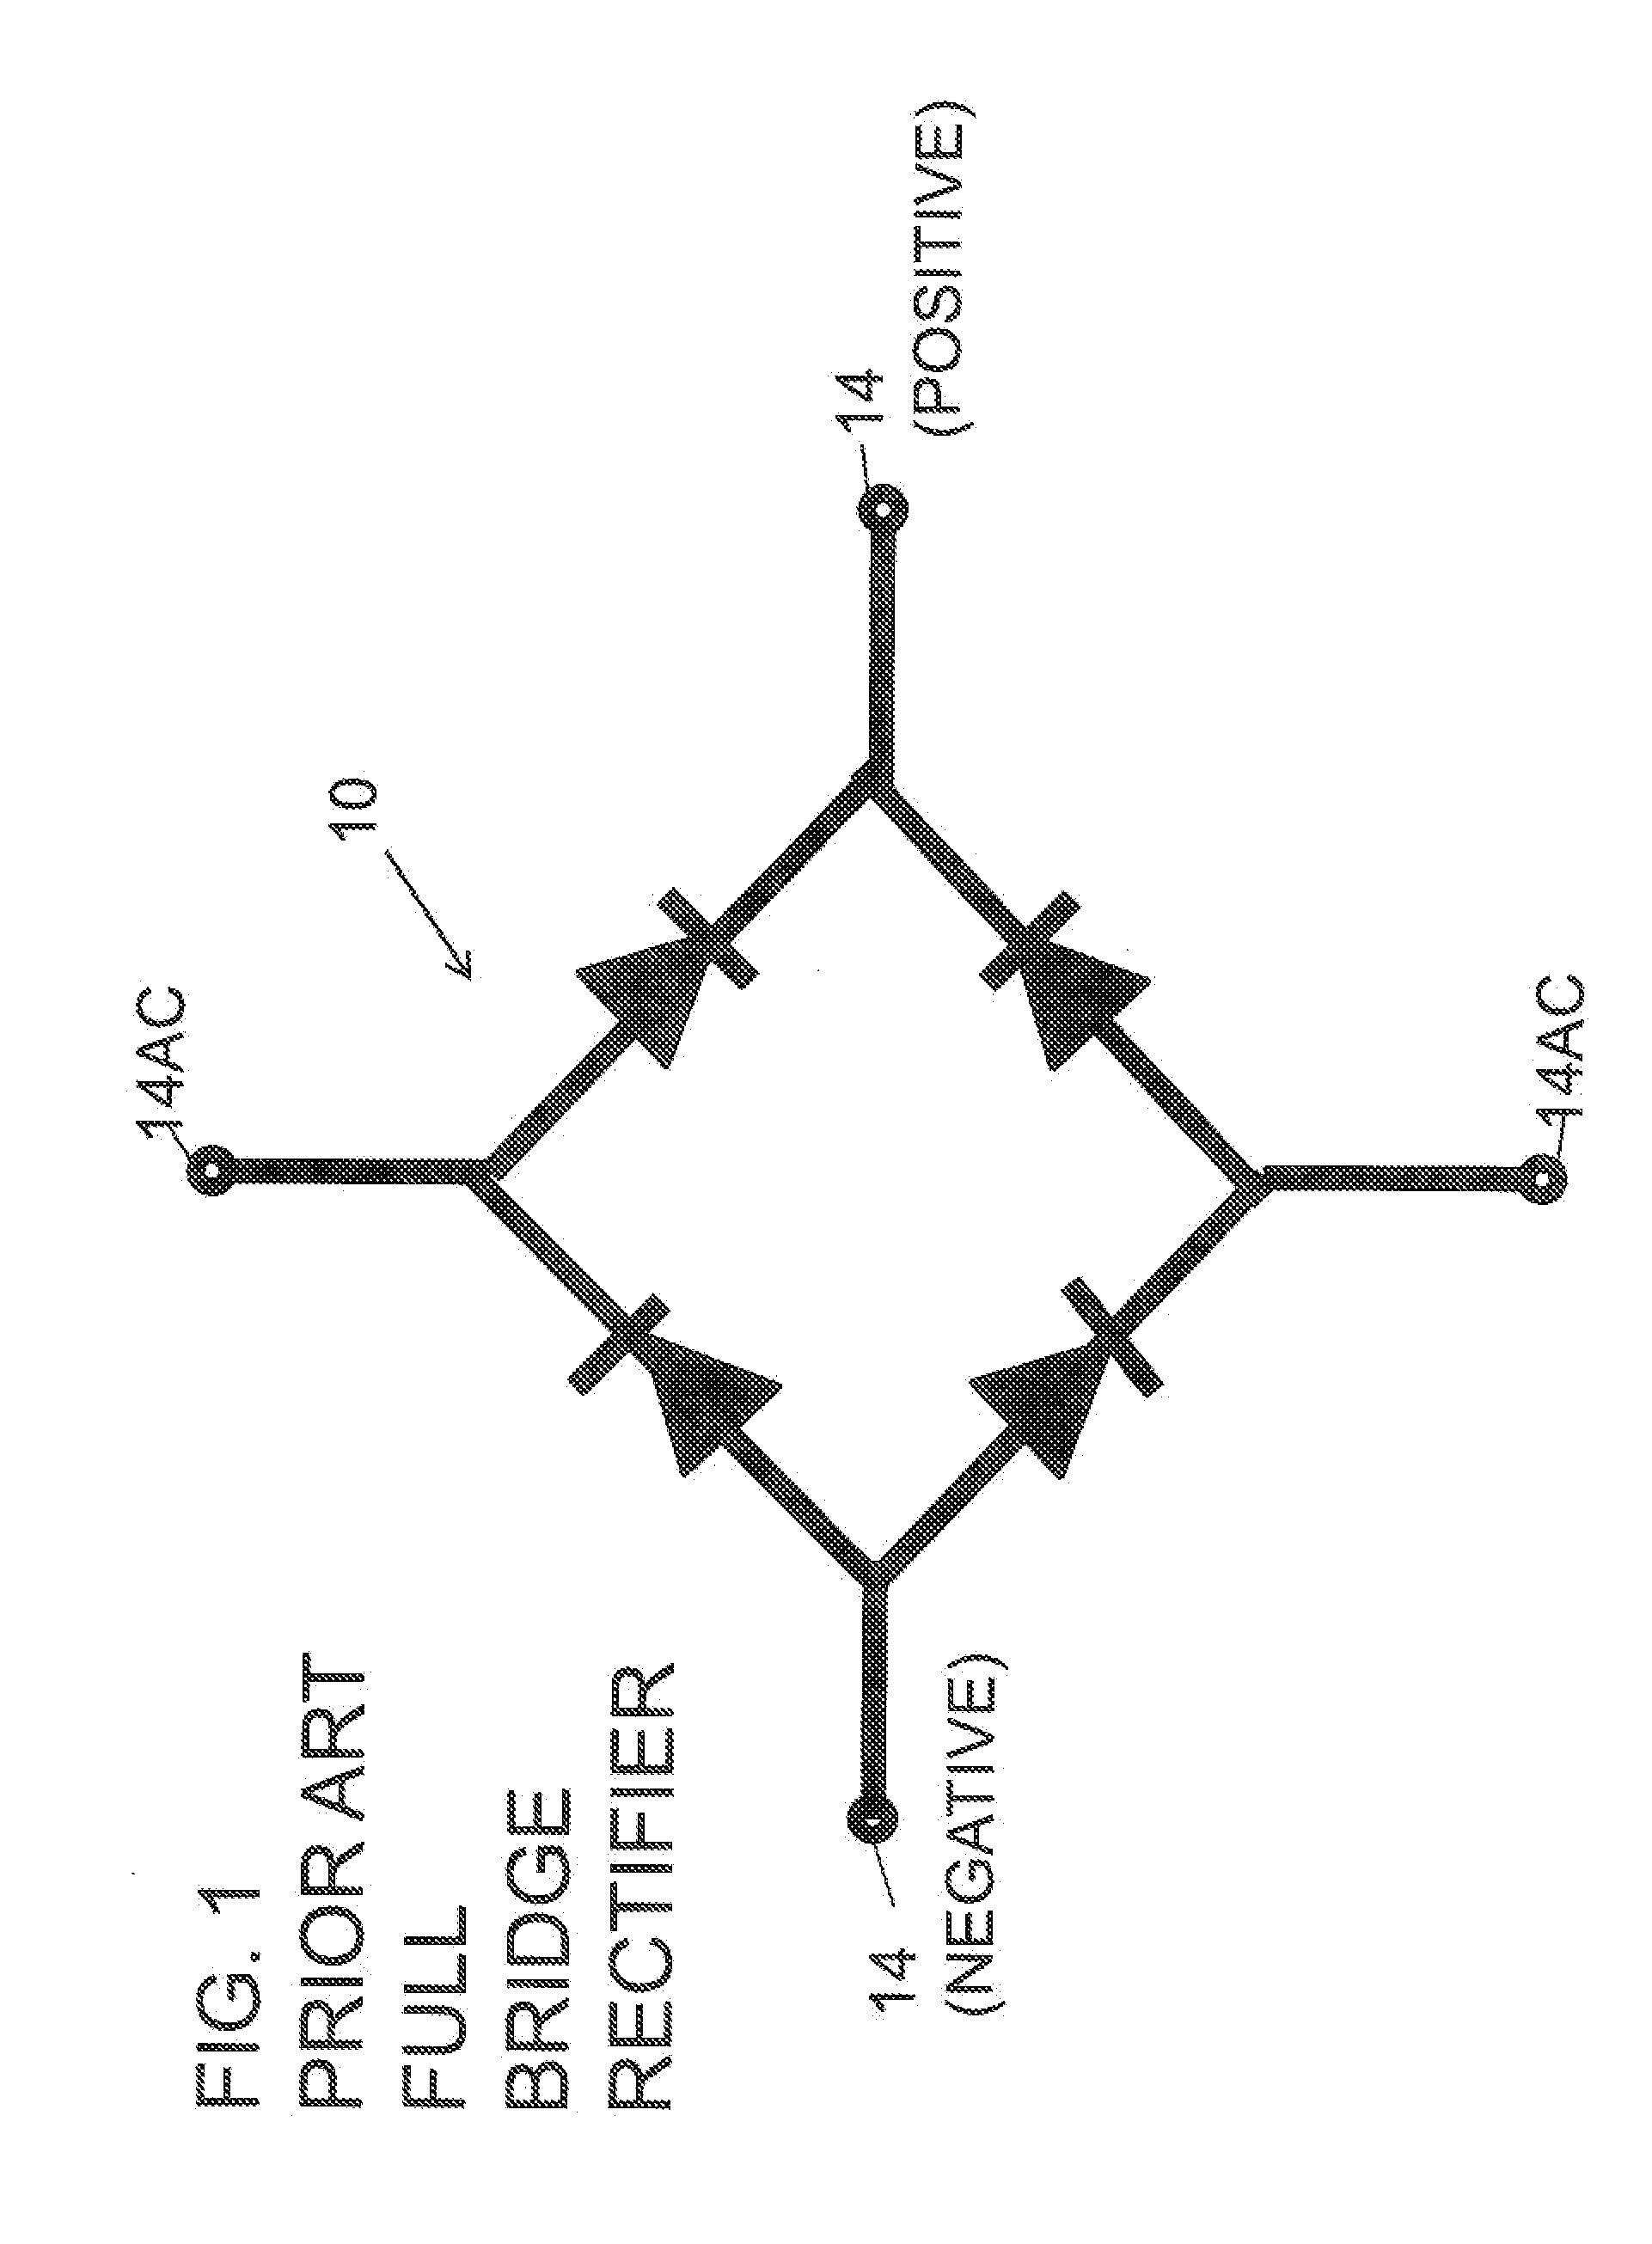 System and Method for Packaging of High-Voltage Semiconductor Devices